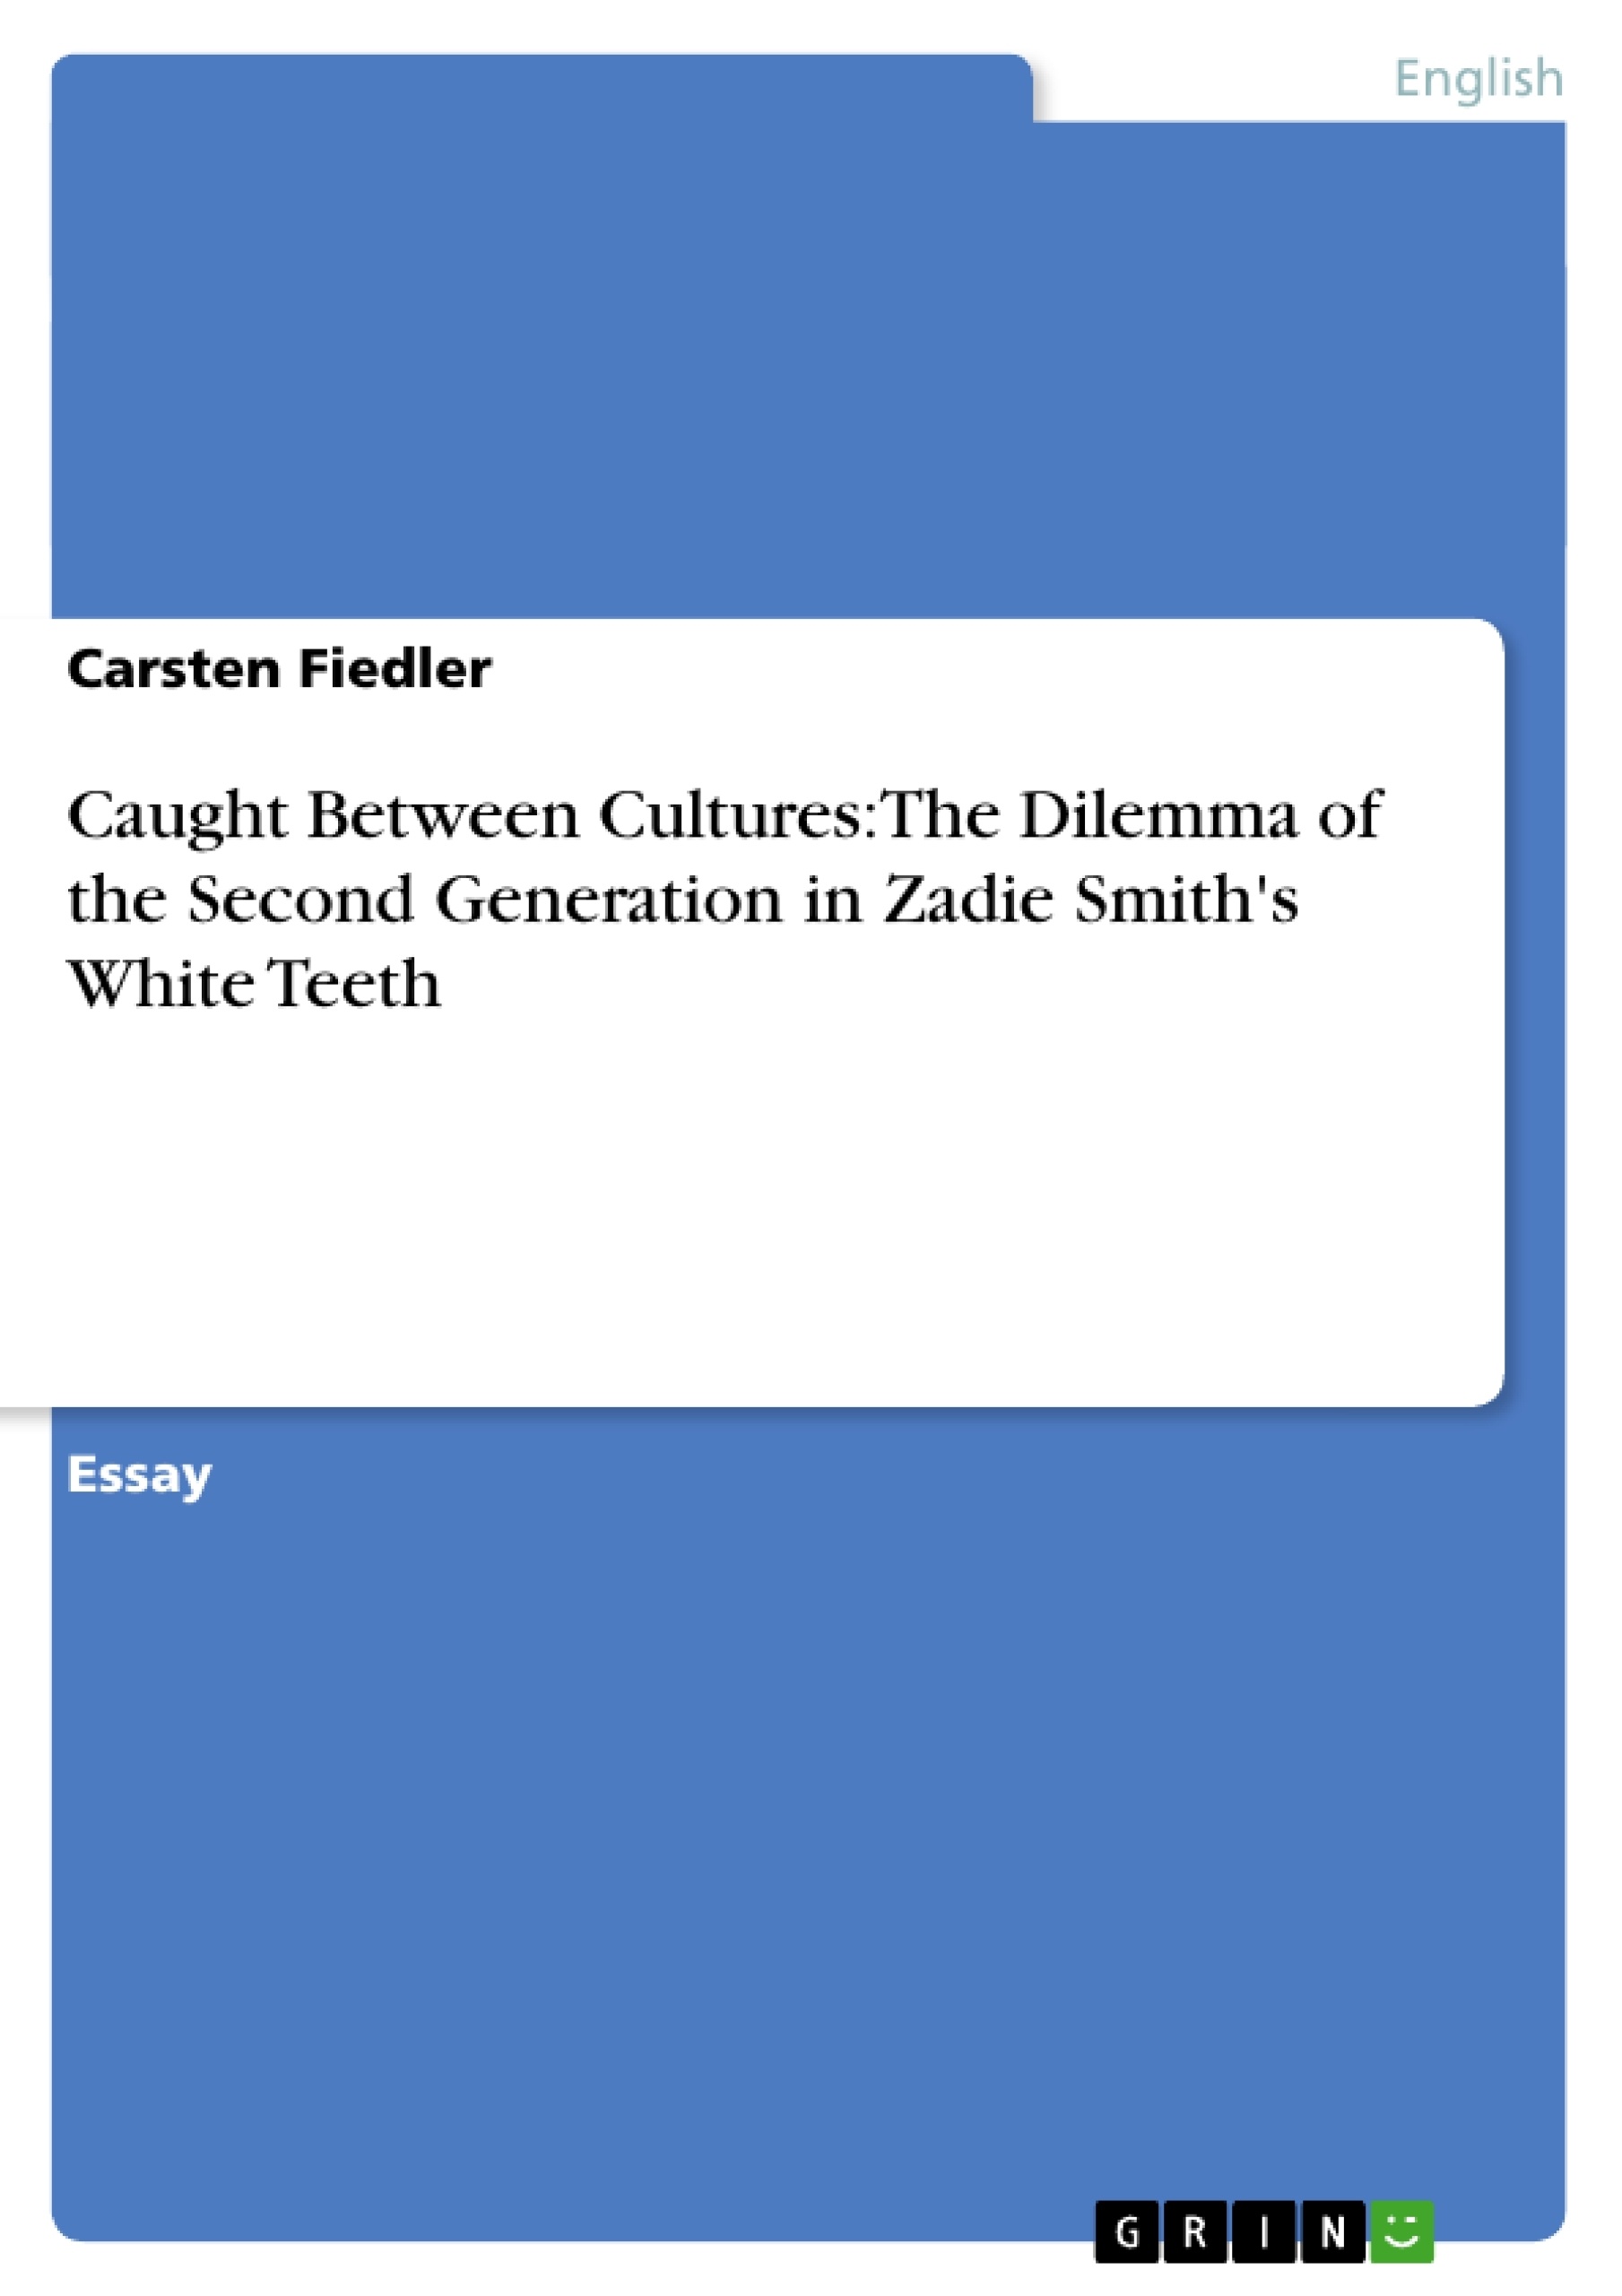 Titre: Caught Between Cultures: The Dilemma of the Second Generation in Zadie Smith's White Teeth